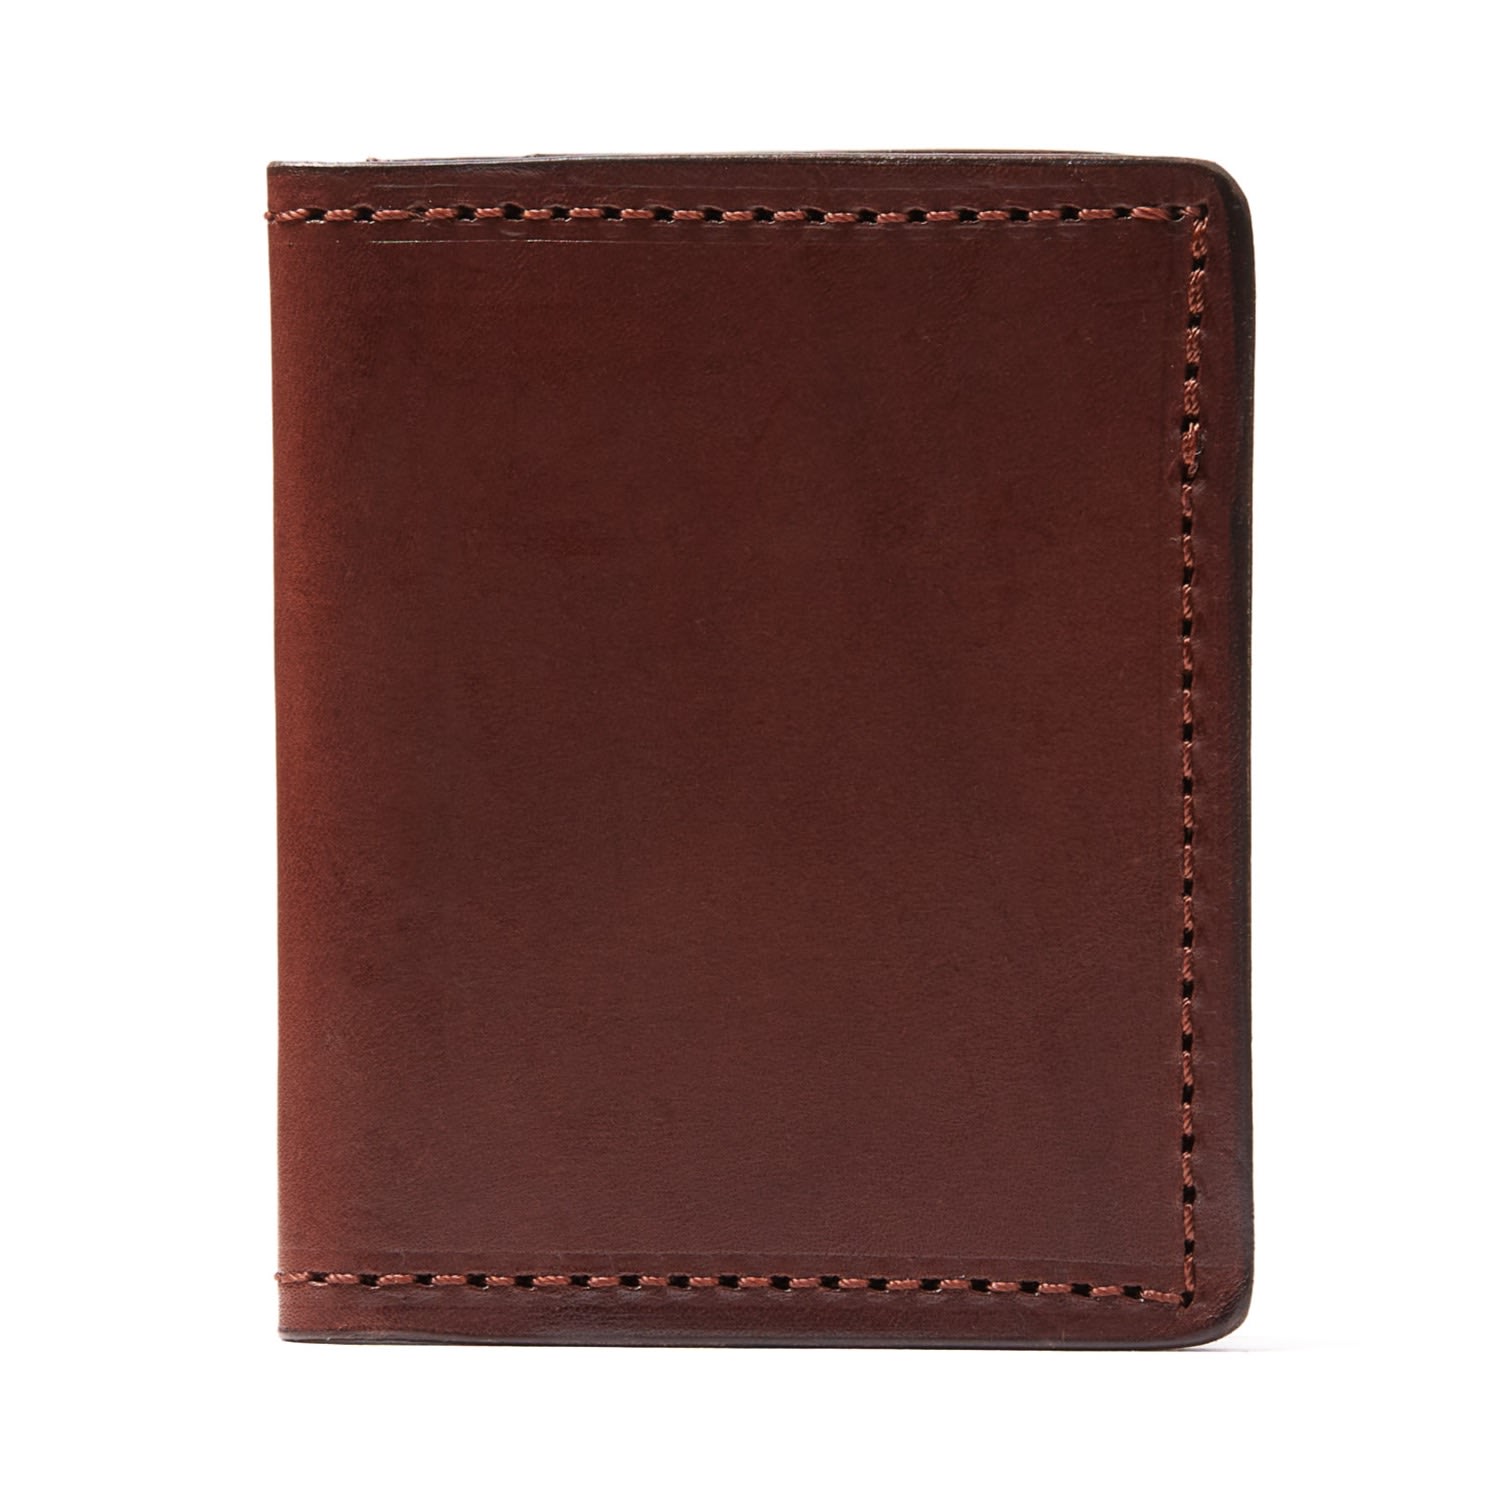 The Dust Company Men's Brown Leather Cardholders In Cuoio Havana New York Style